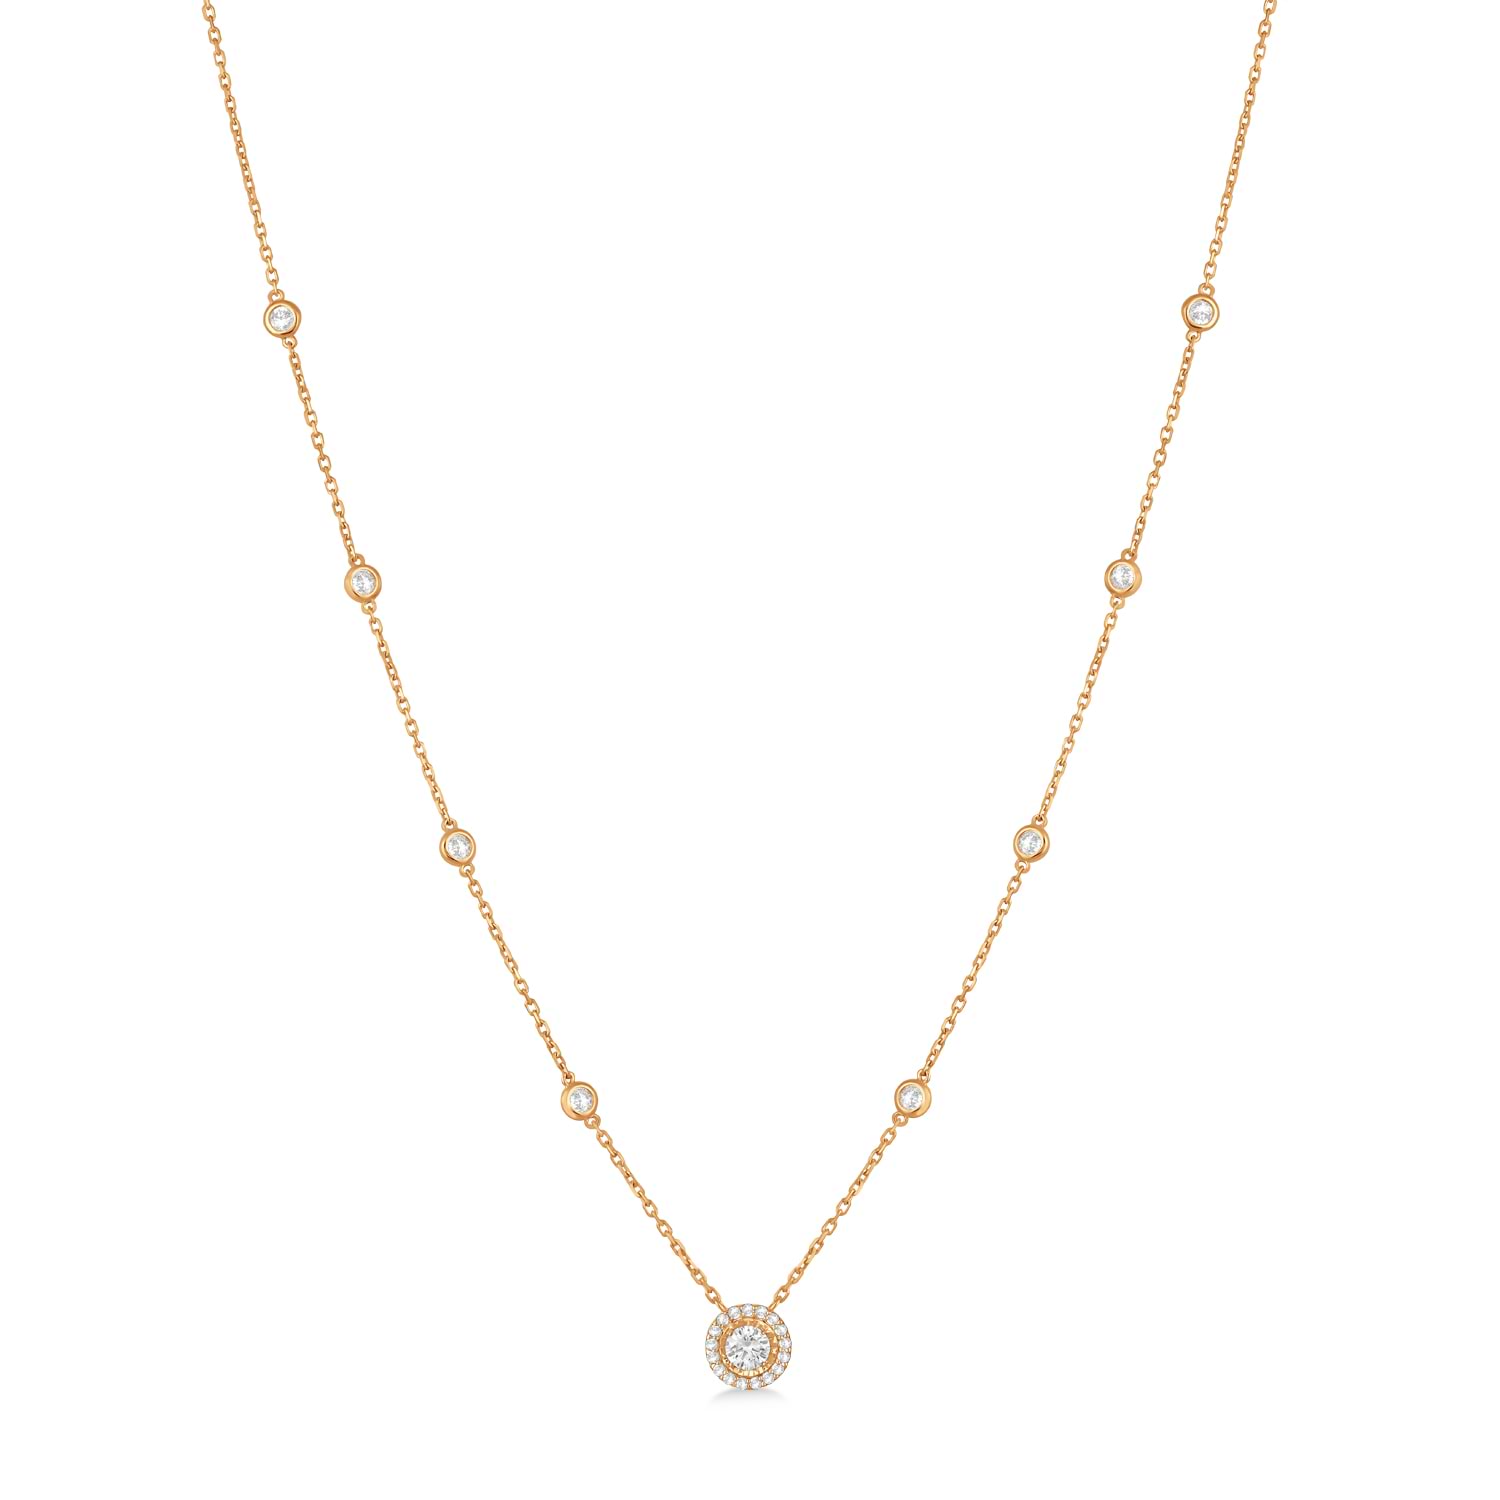 Diamond Halo Pendant Station Necklace in 14k Rose Gold (1.50 ctw)